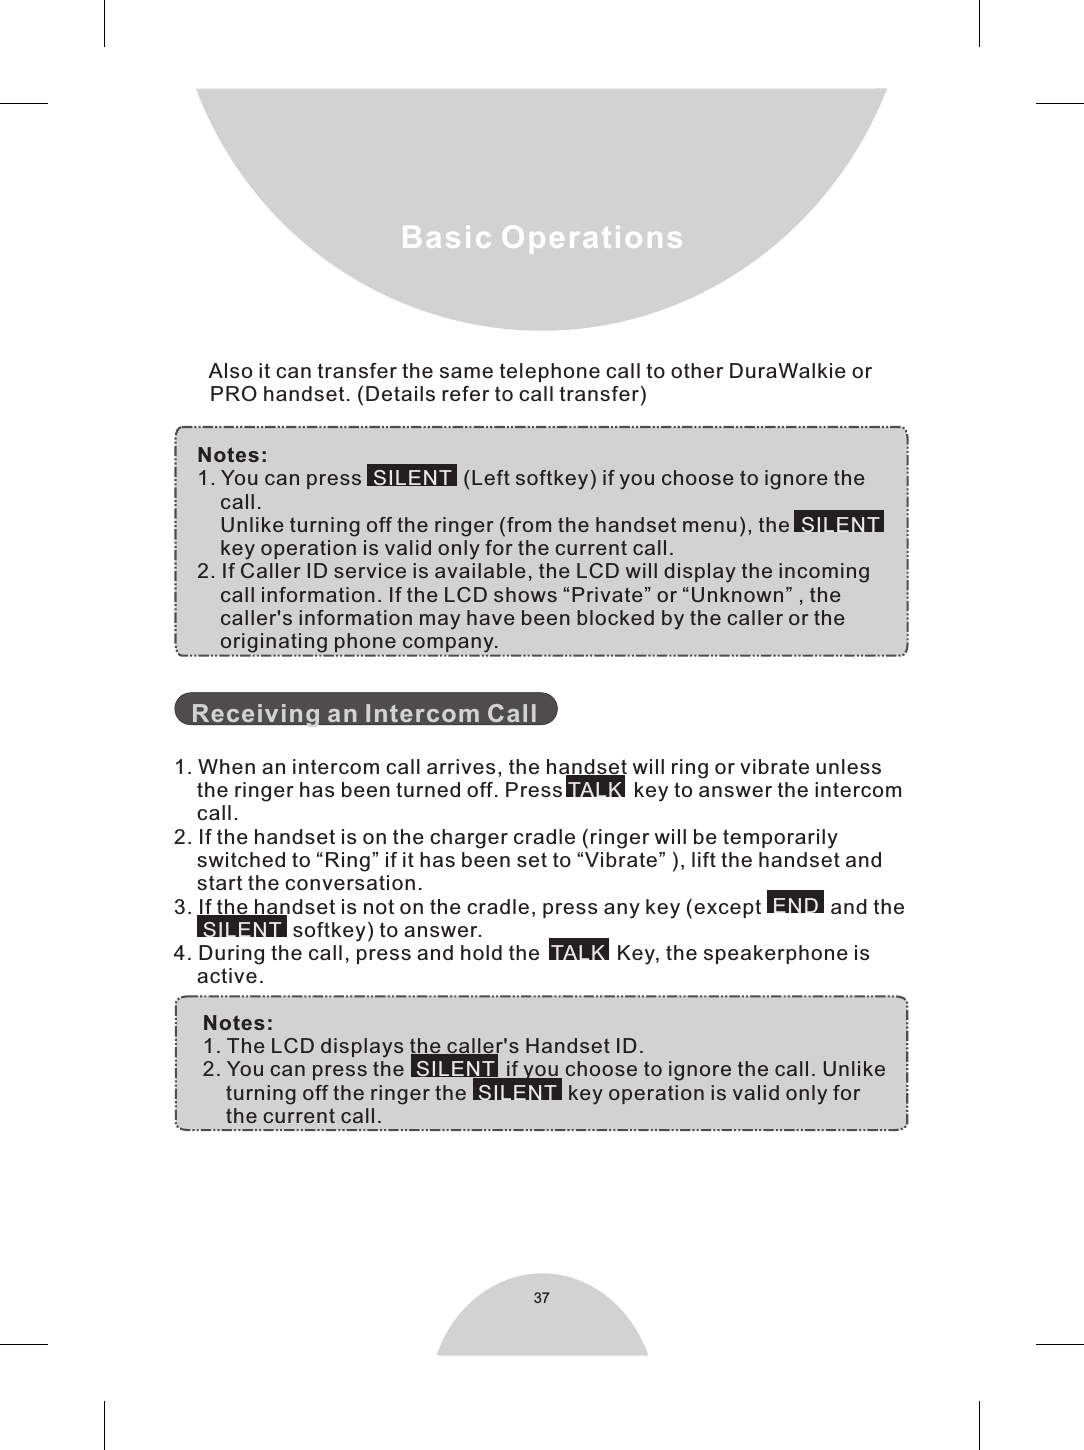 37Basic Operations    Notes:    1. You can press     (Left softkey) if you choose to ignore the        call.         Unlike turning off the ringer (from the handset menu), the          key operation is valid only for the current call.     2. If Caller ID service is available, the LCD will display the incoming        call information. If the LCD shows “Private” or “Unknown” , the        caller&apos;s information may have been blocked by the caller or the        originating phone company. 1. When an intercom call arrives, the handset will ring or vibrate unless    the ringer has been turned off. Press    key to answer the intercom     call.2. If the handset is on the charger cradle (ringer will be temporarily    switched to “Ring” if it has been set to “Vibrate” ), lift the handset and    start the conversation.3. If the handset is not on the cradle, press any key (except    and the       softkey) to answer.4. During the call, press and hold the    Key, the speakerphone is    active.     Notes:     1. The LCD displays the caller&apos;s Handset ID.     2. You can press the     if you choose to ignore the call. Unlike         turning off the ringer the     key operation is valid only for         the current call.SILENTSILENTTALKENDSILENTTALK SILENTSILENT  Receiving an Intercom Call        Also it can transfer the same telephone call to other DuraWalkie or        PRO handset. (Details refer to call transfer)